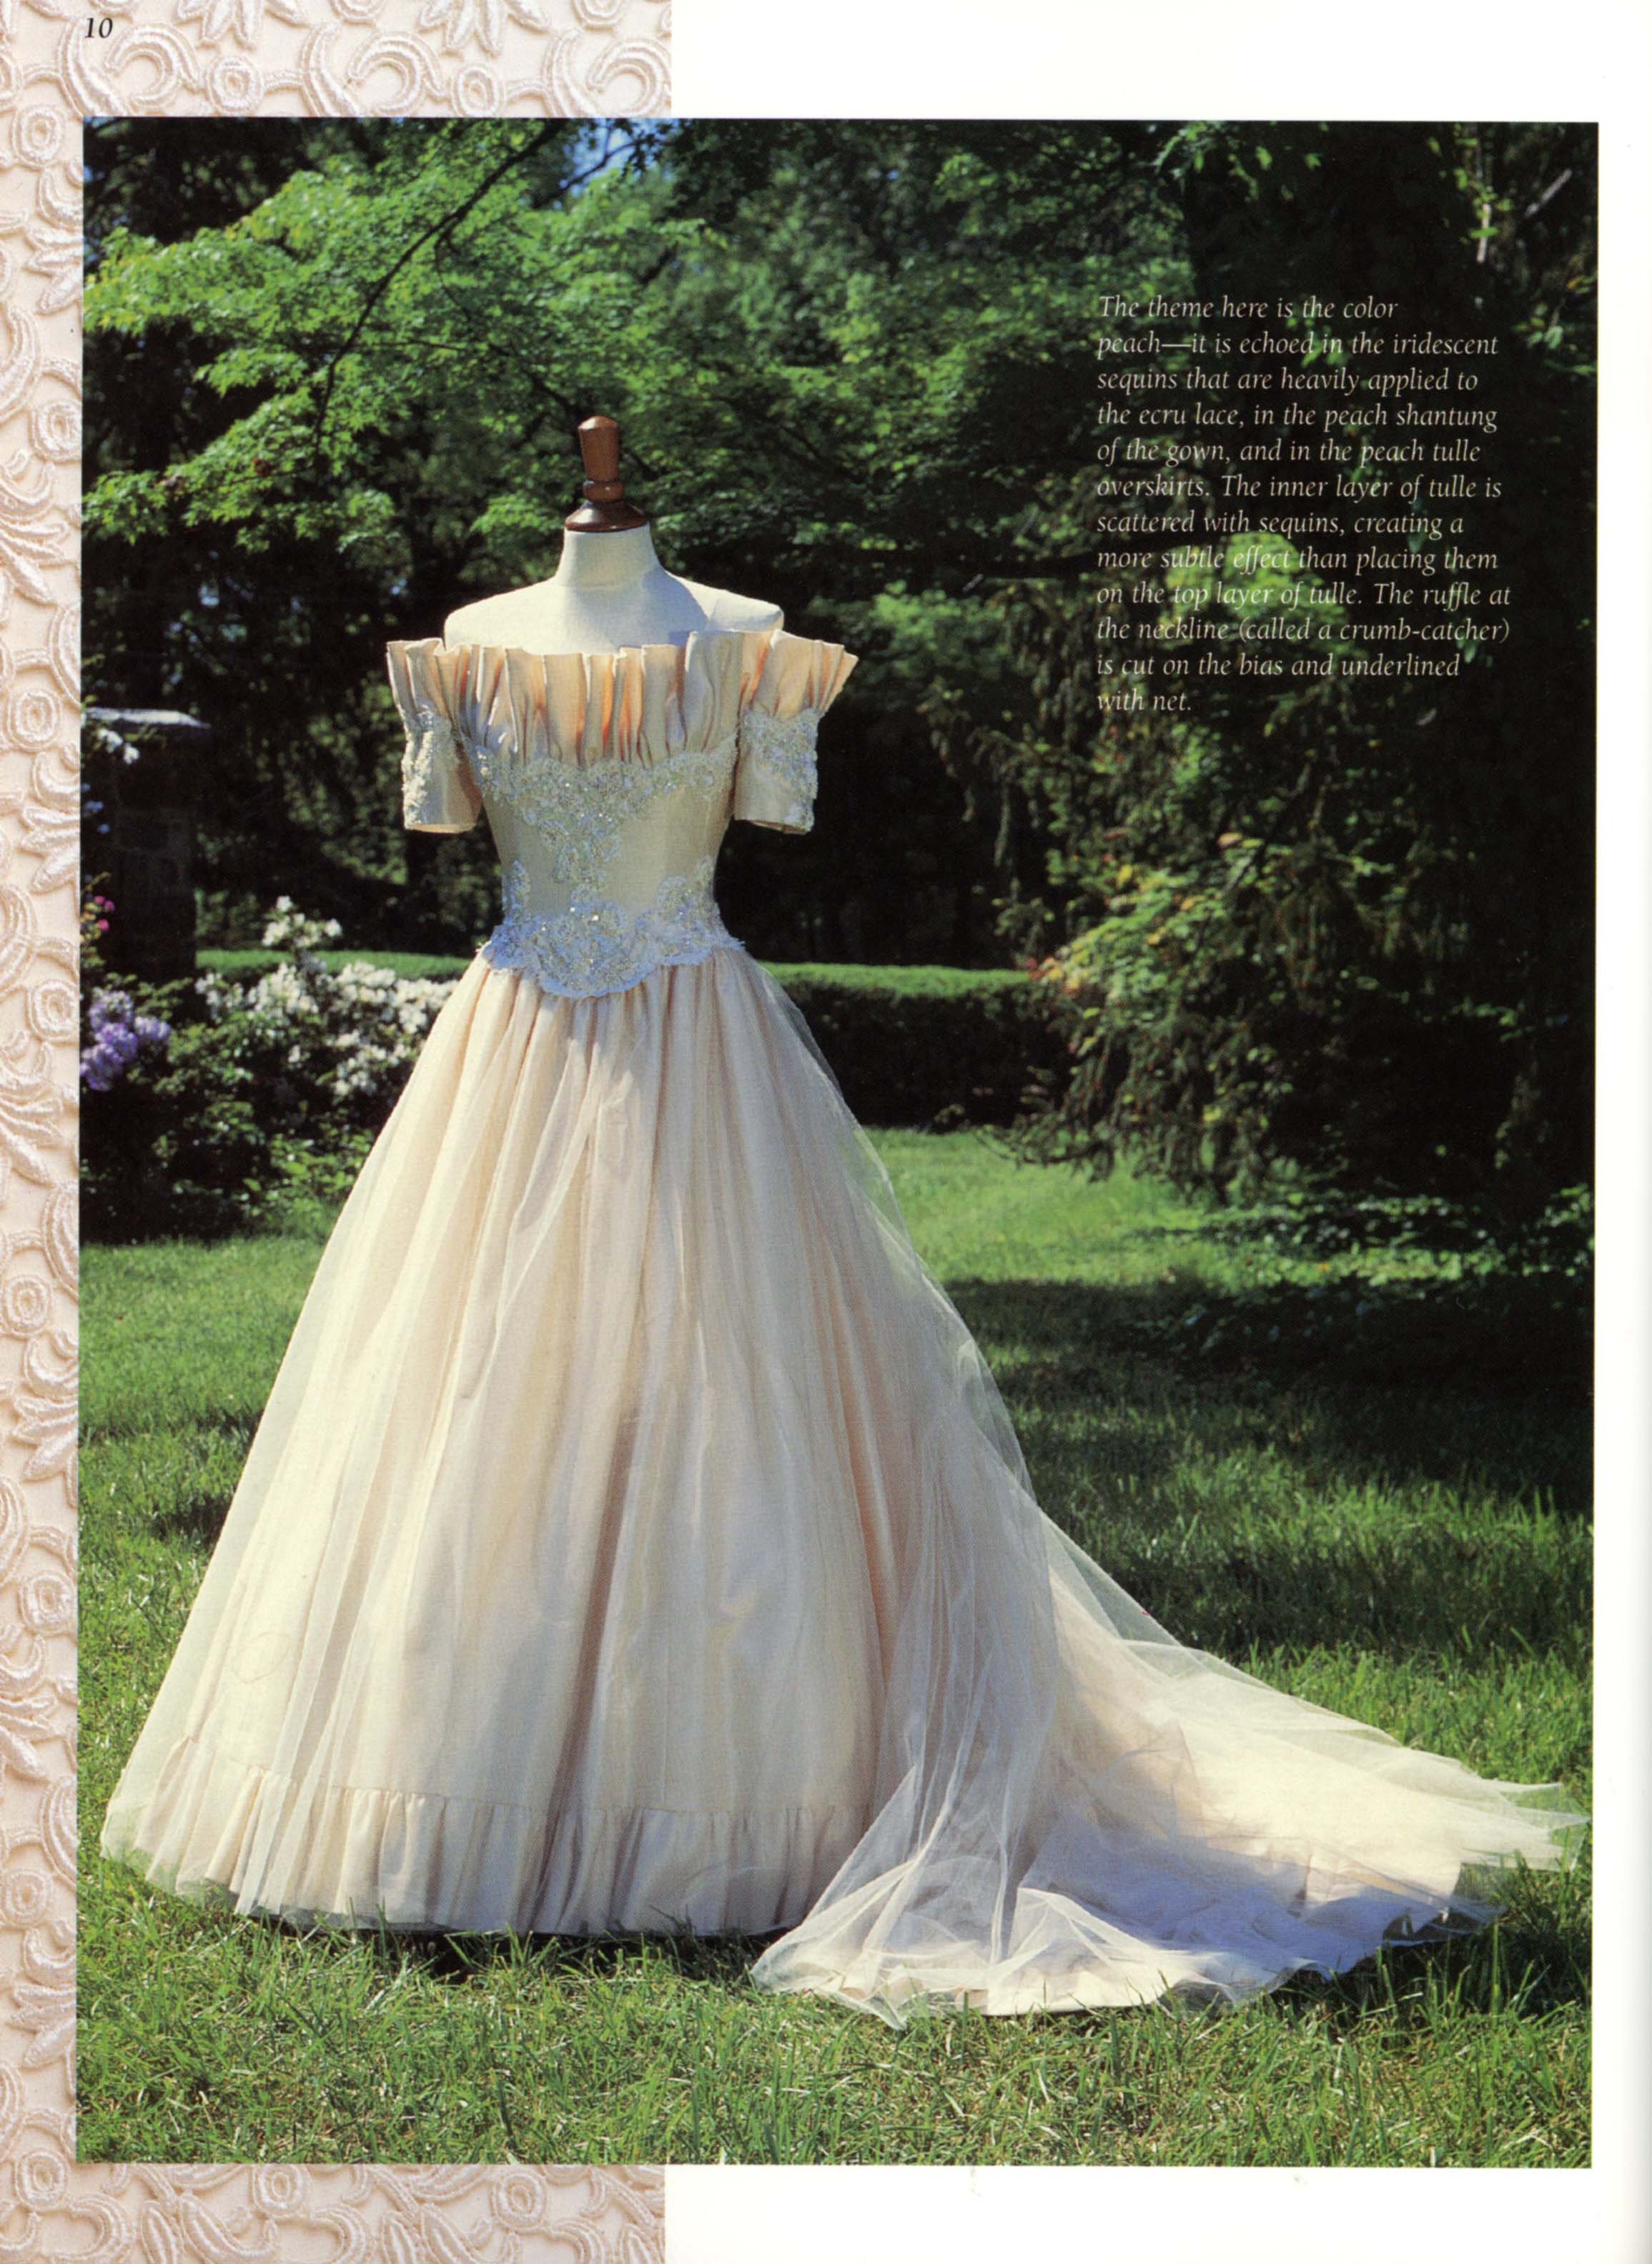 Ballgown with off-shoulder bodice and full skirt, from "Bridal Couture" by S. Khalje